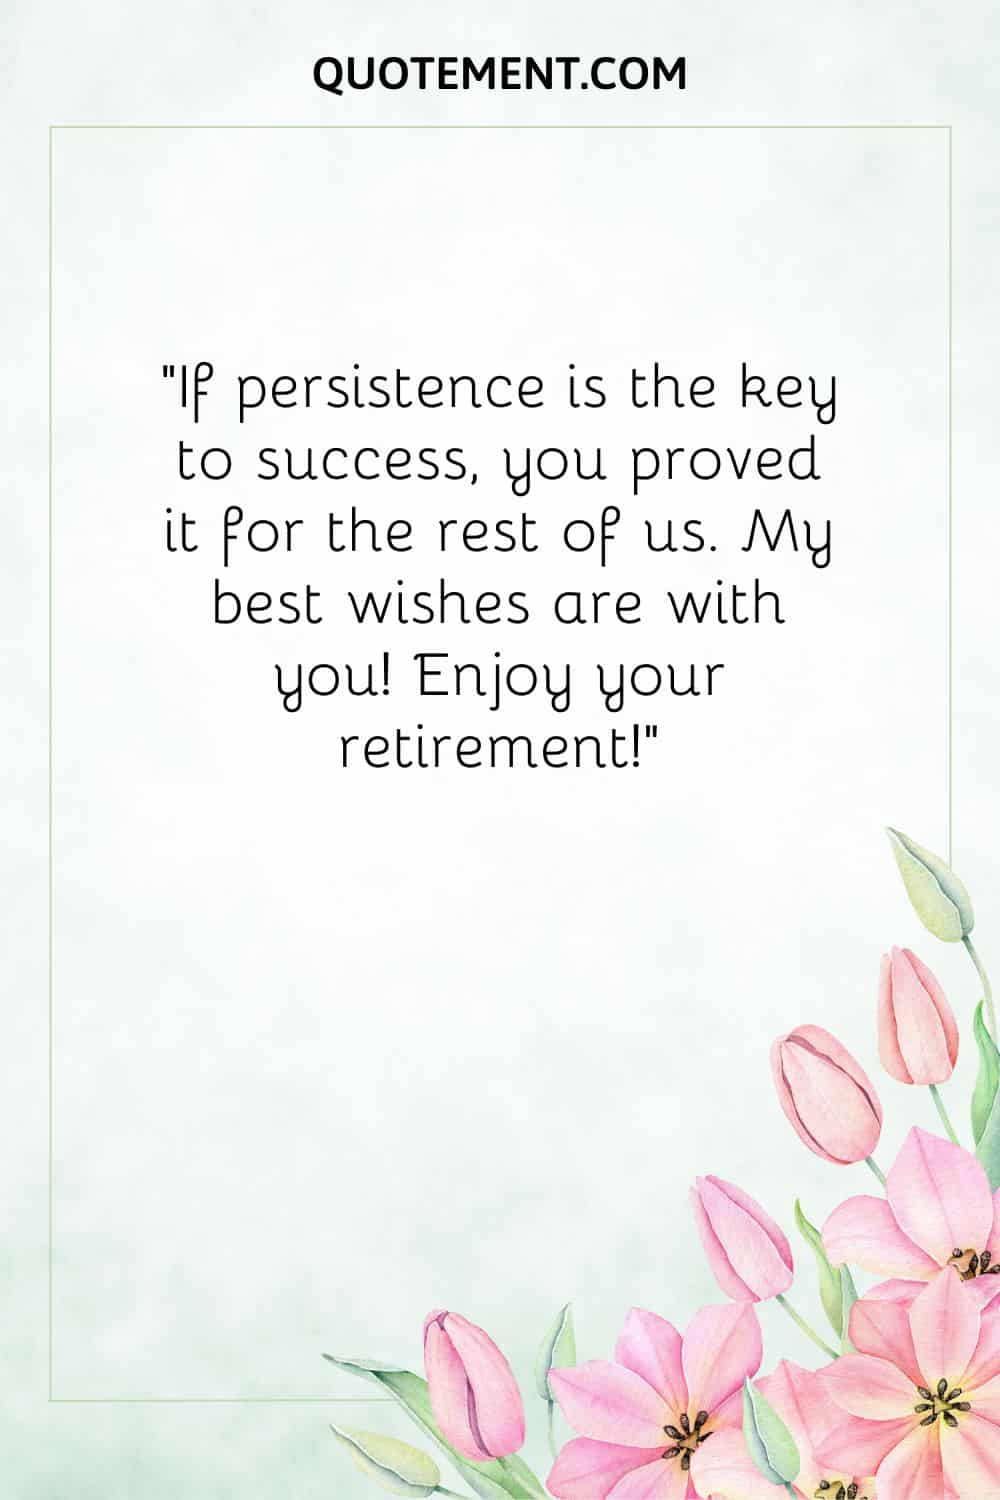 If persistence is the key to success, you proved it for the rest of us